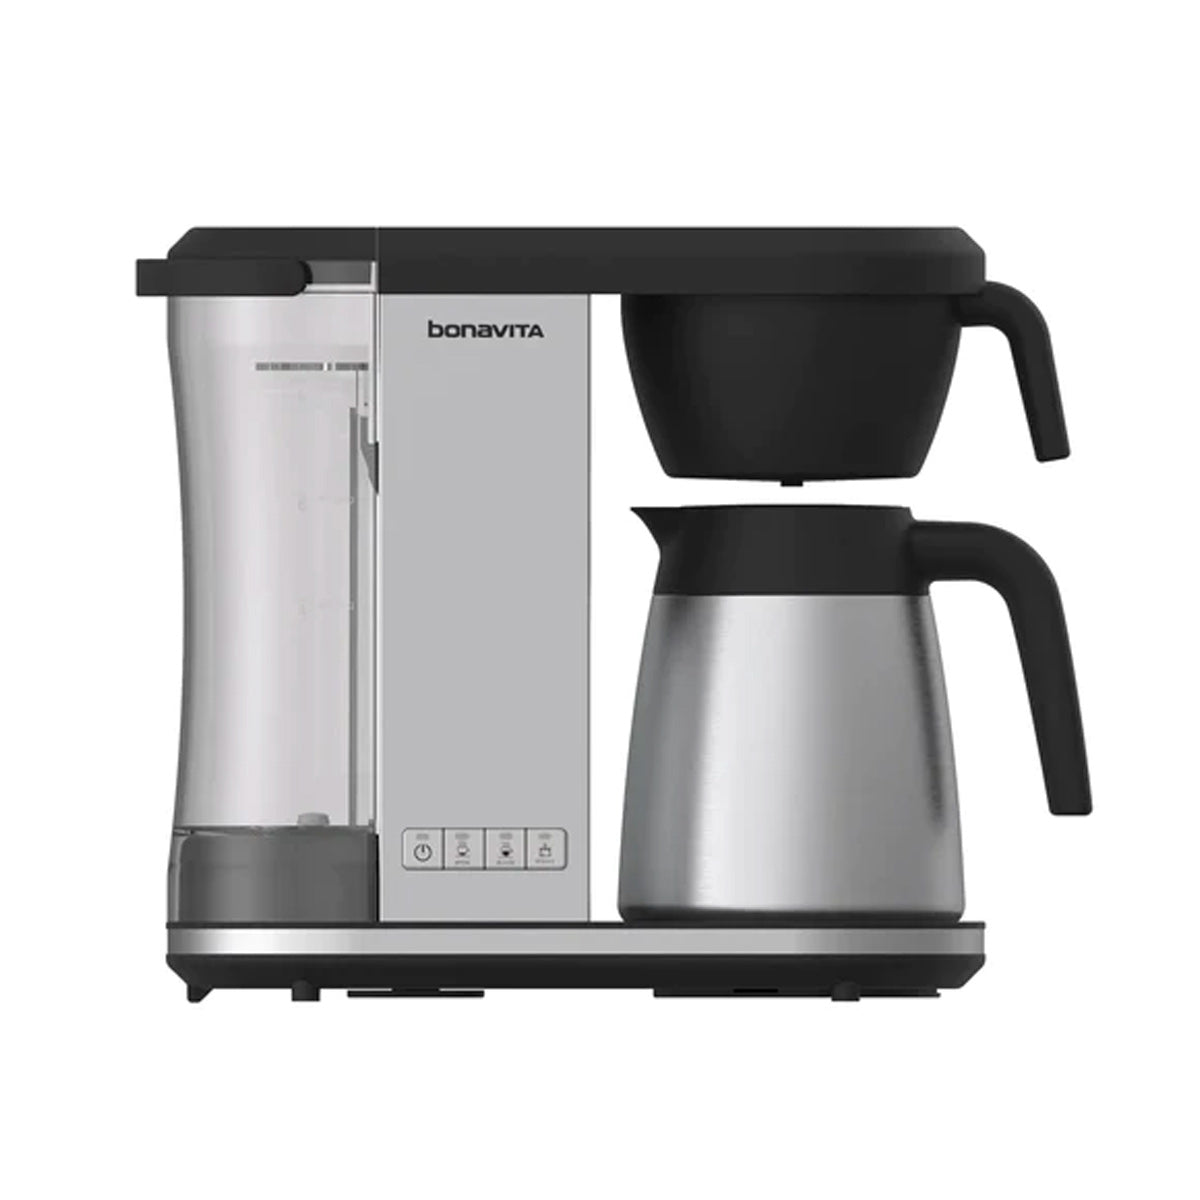 Bonavita 5-Cup One-Touch Coffee Maker Featuring Thermal Carafe BV1500TS